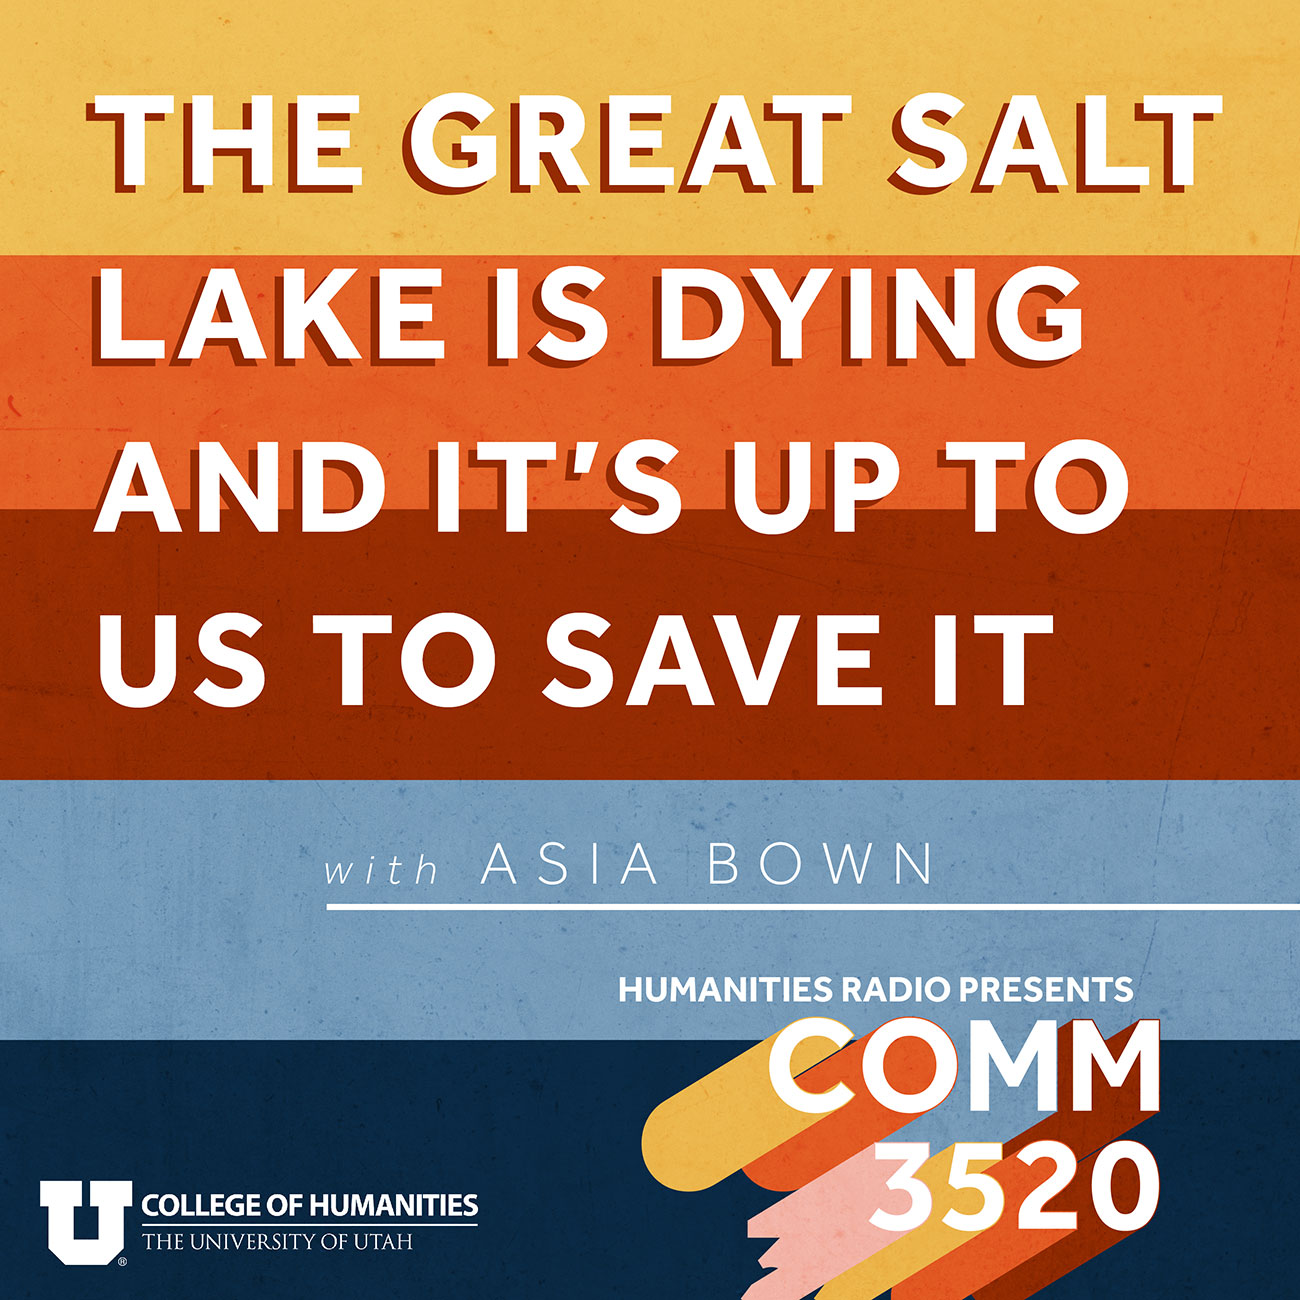 The Great Salt Lake is Dying and It’s Up to Us to Save It